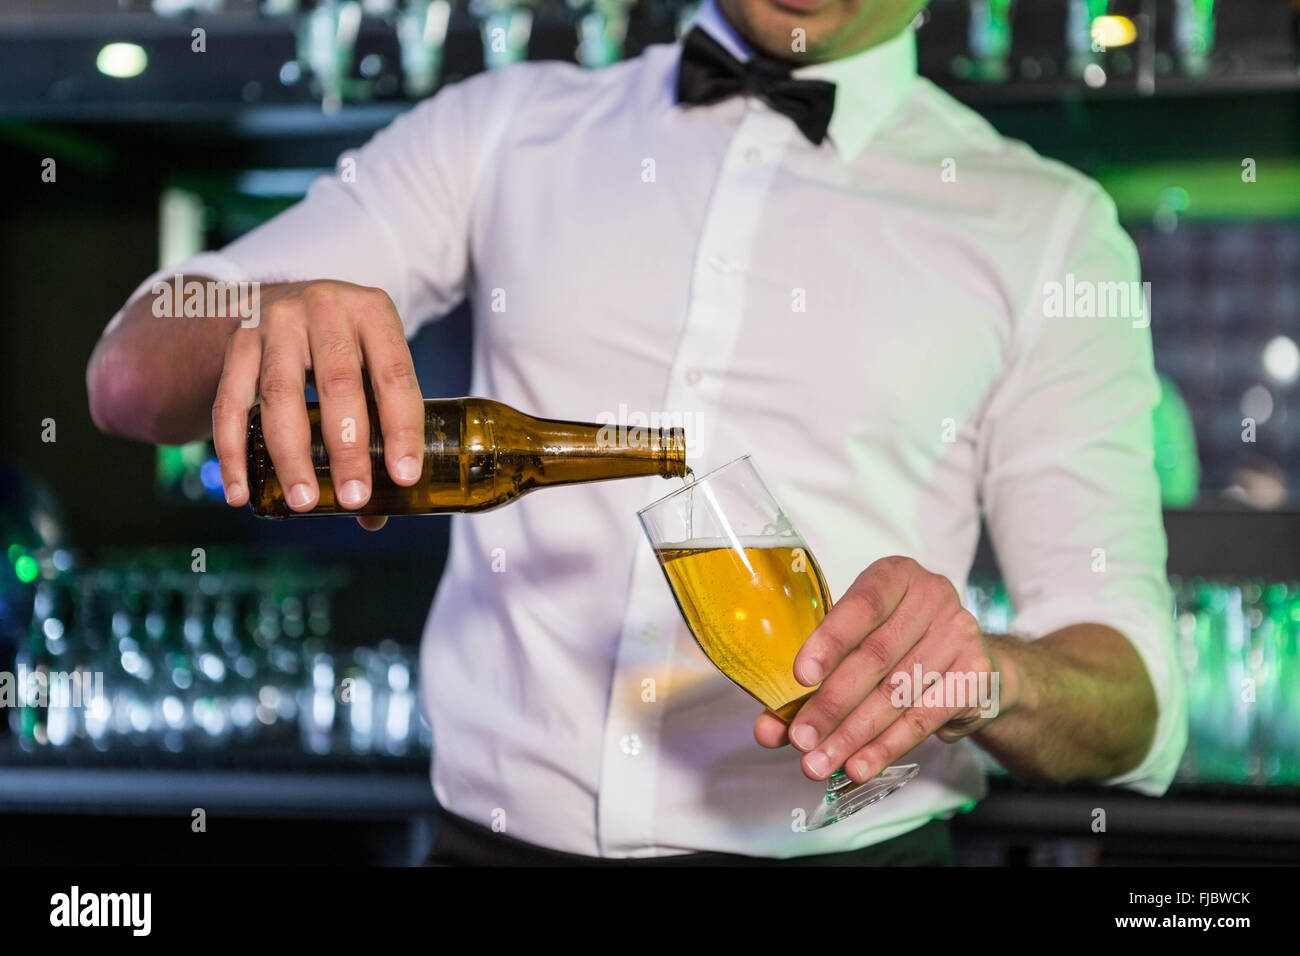 Mid section of bartender pouring beer in a glass Stock Photo